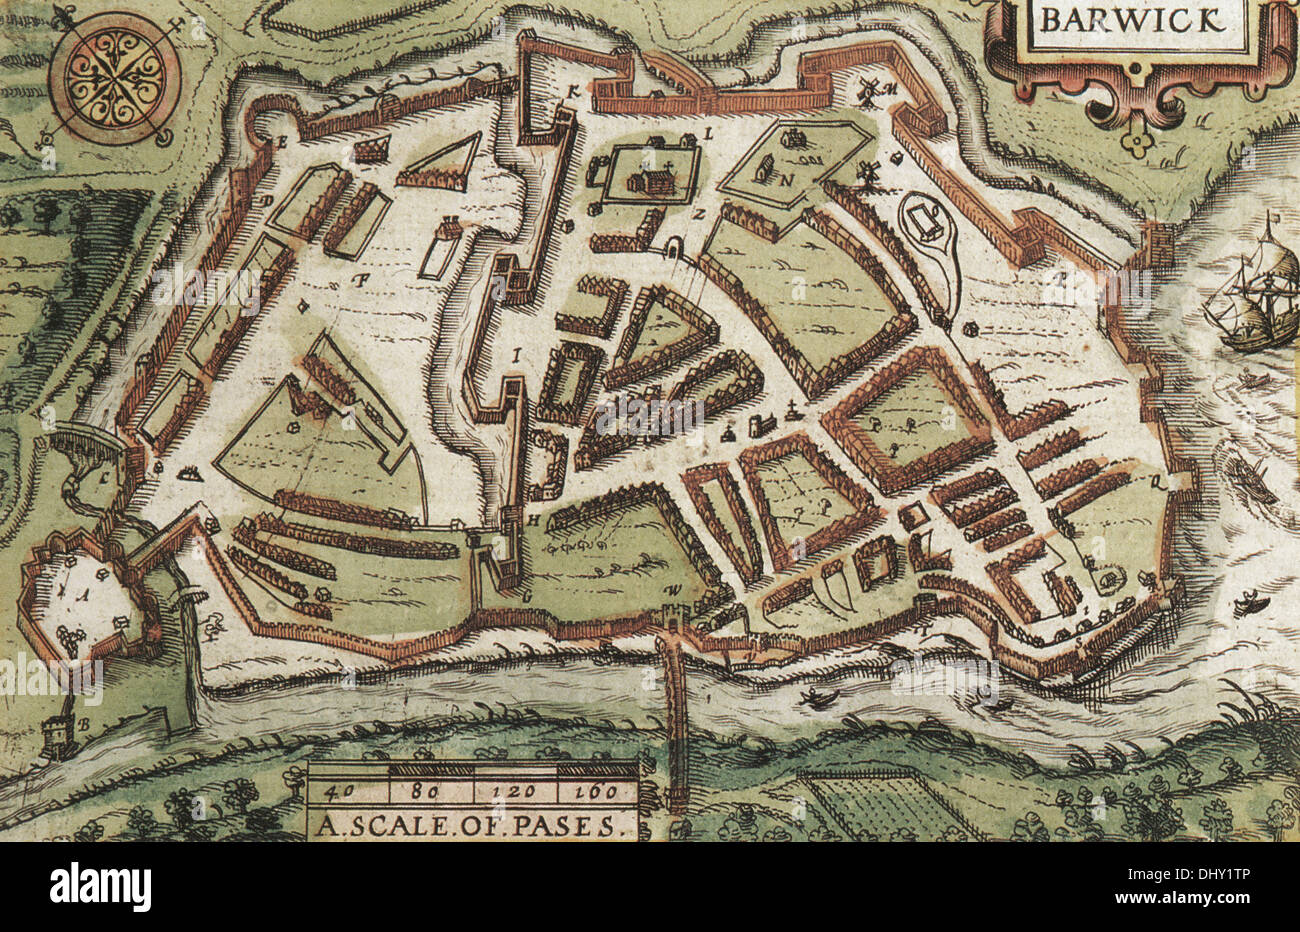 Old Map Of Berwick By John Speed 1611 DHY1TP 